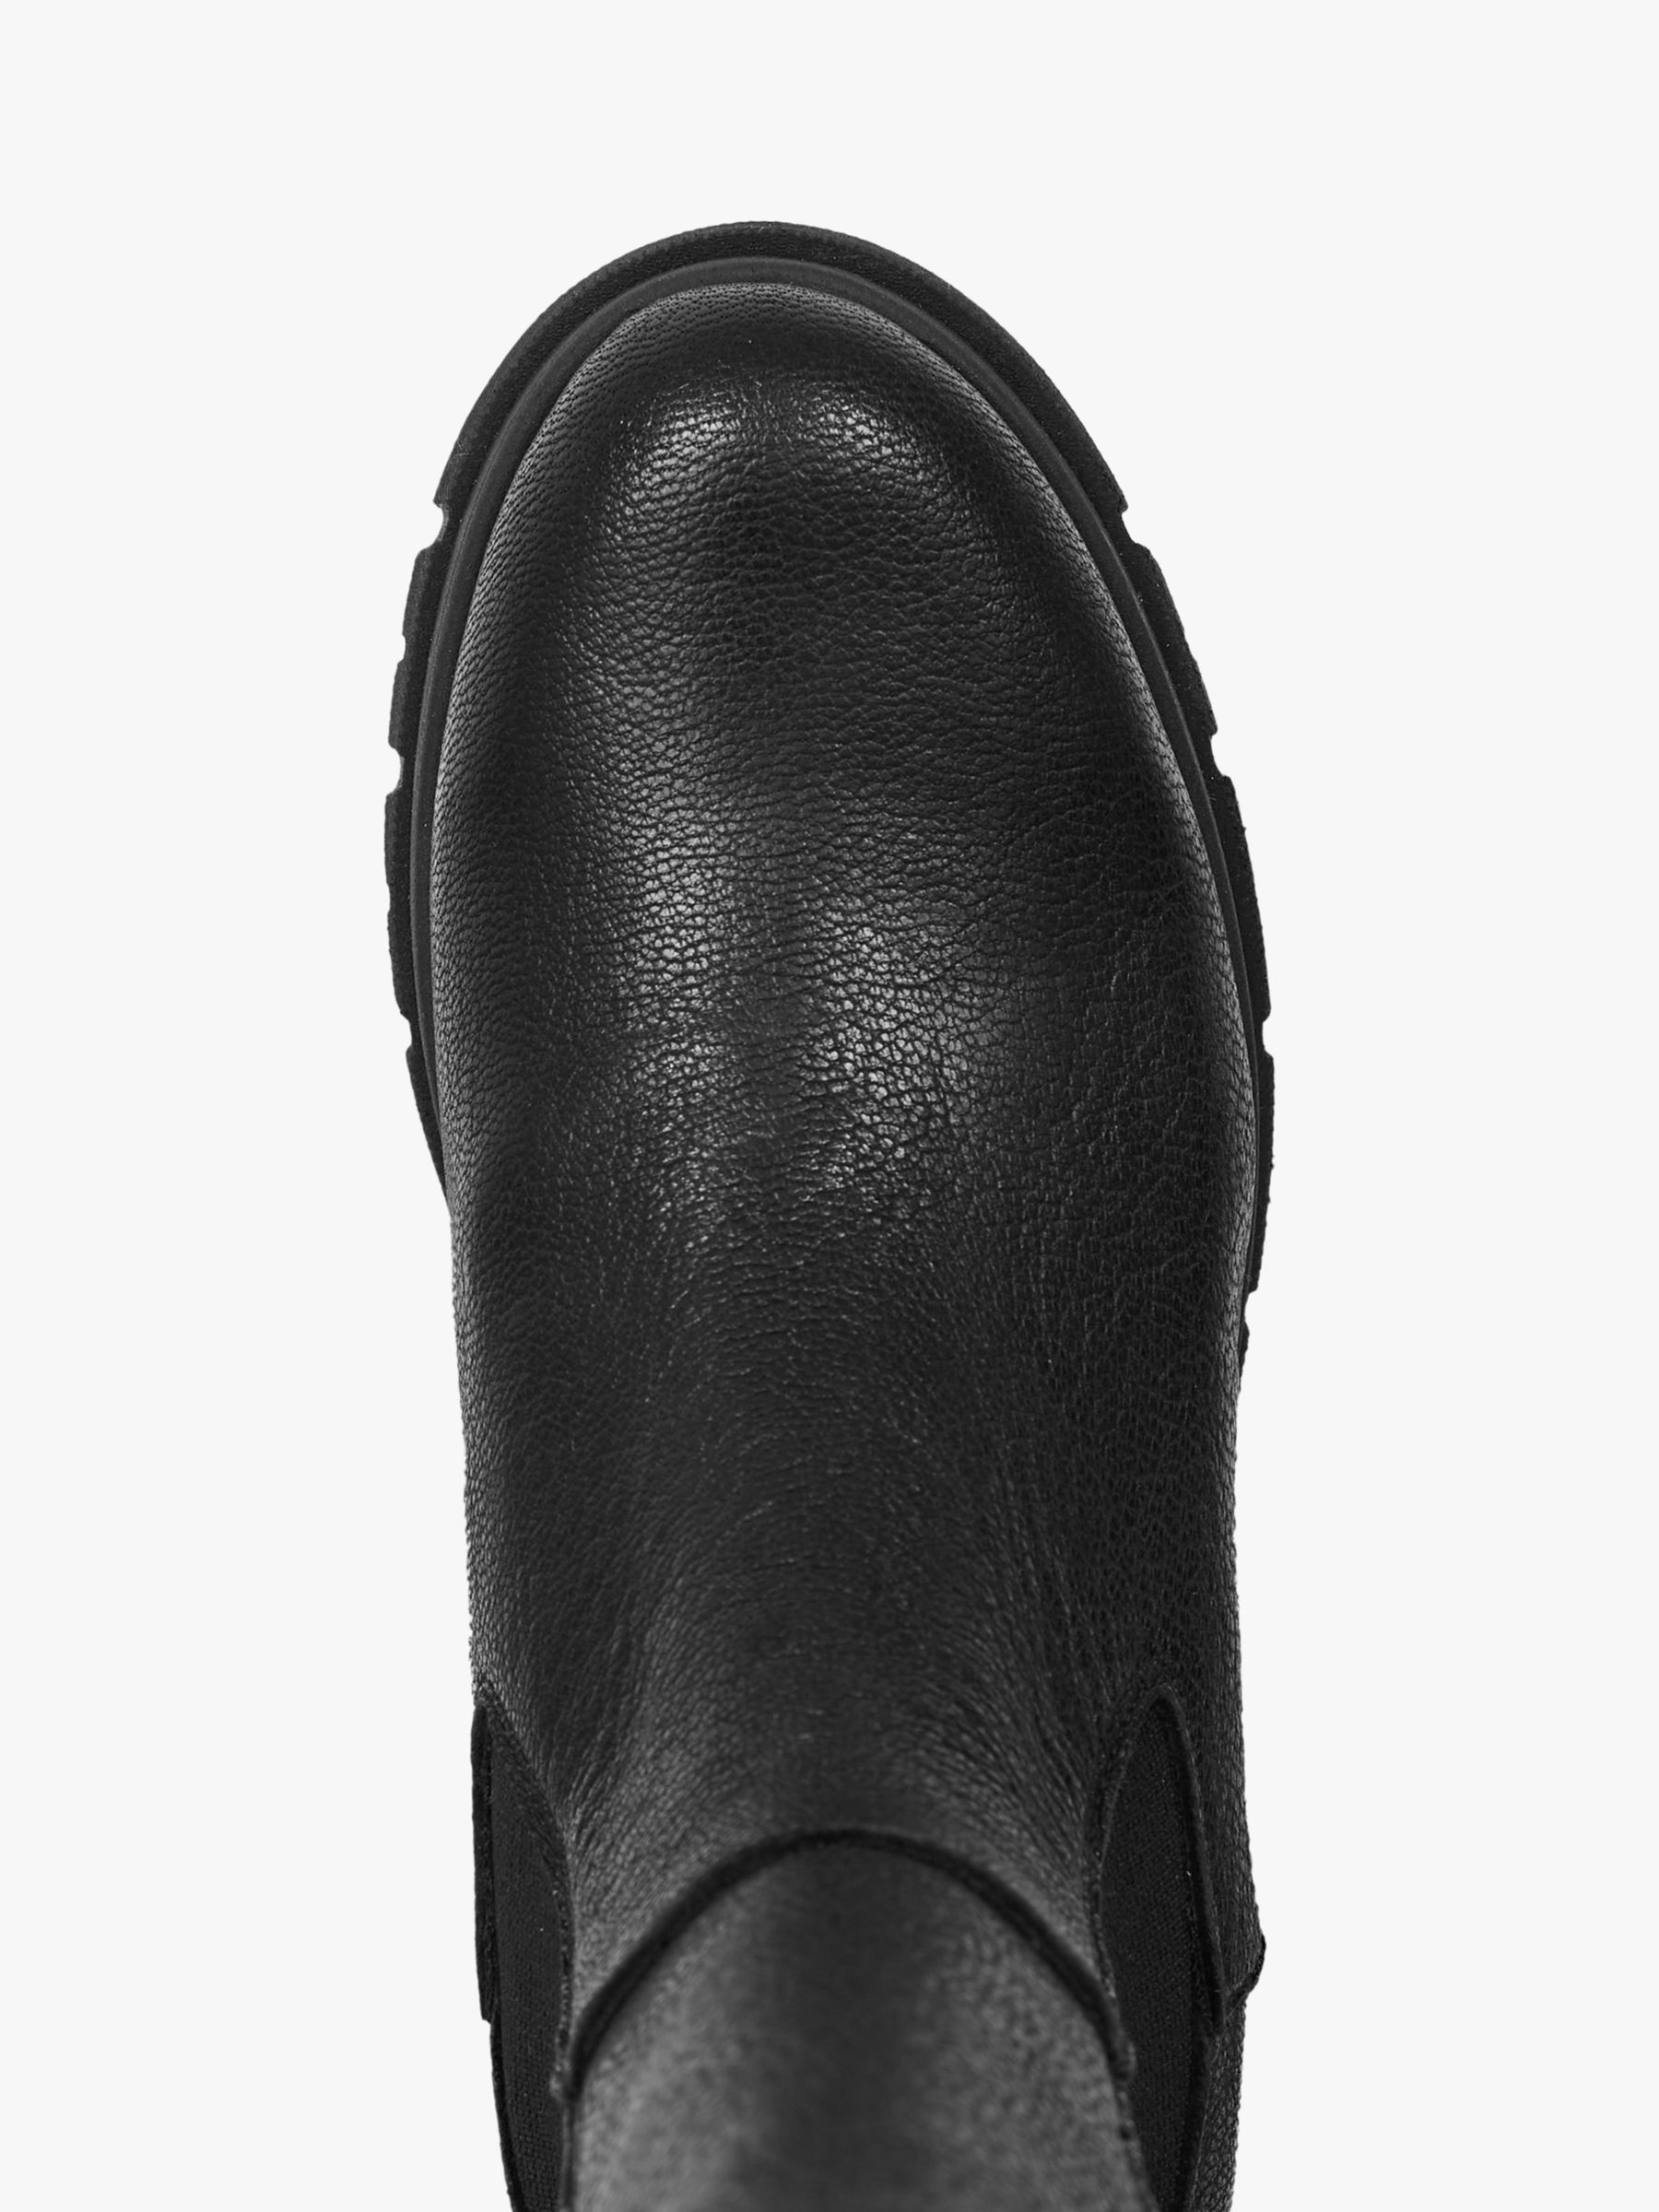 Celtic & Co. Chunky Tall Leather Chelsea Boot, Black, 3